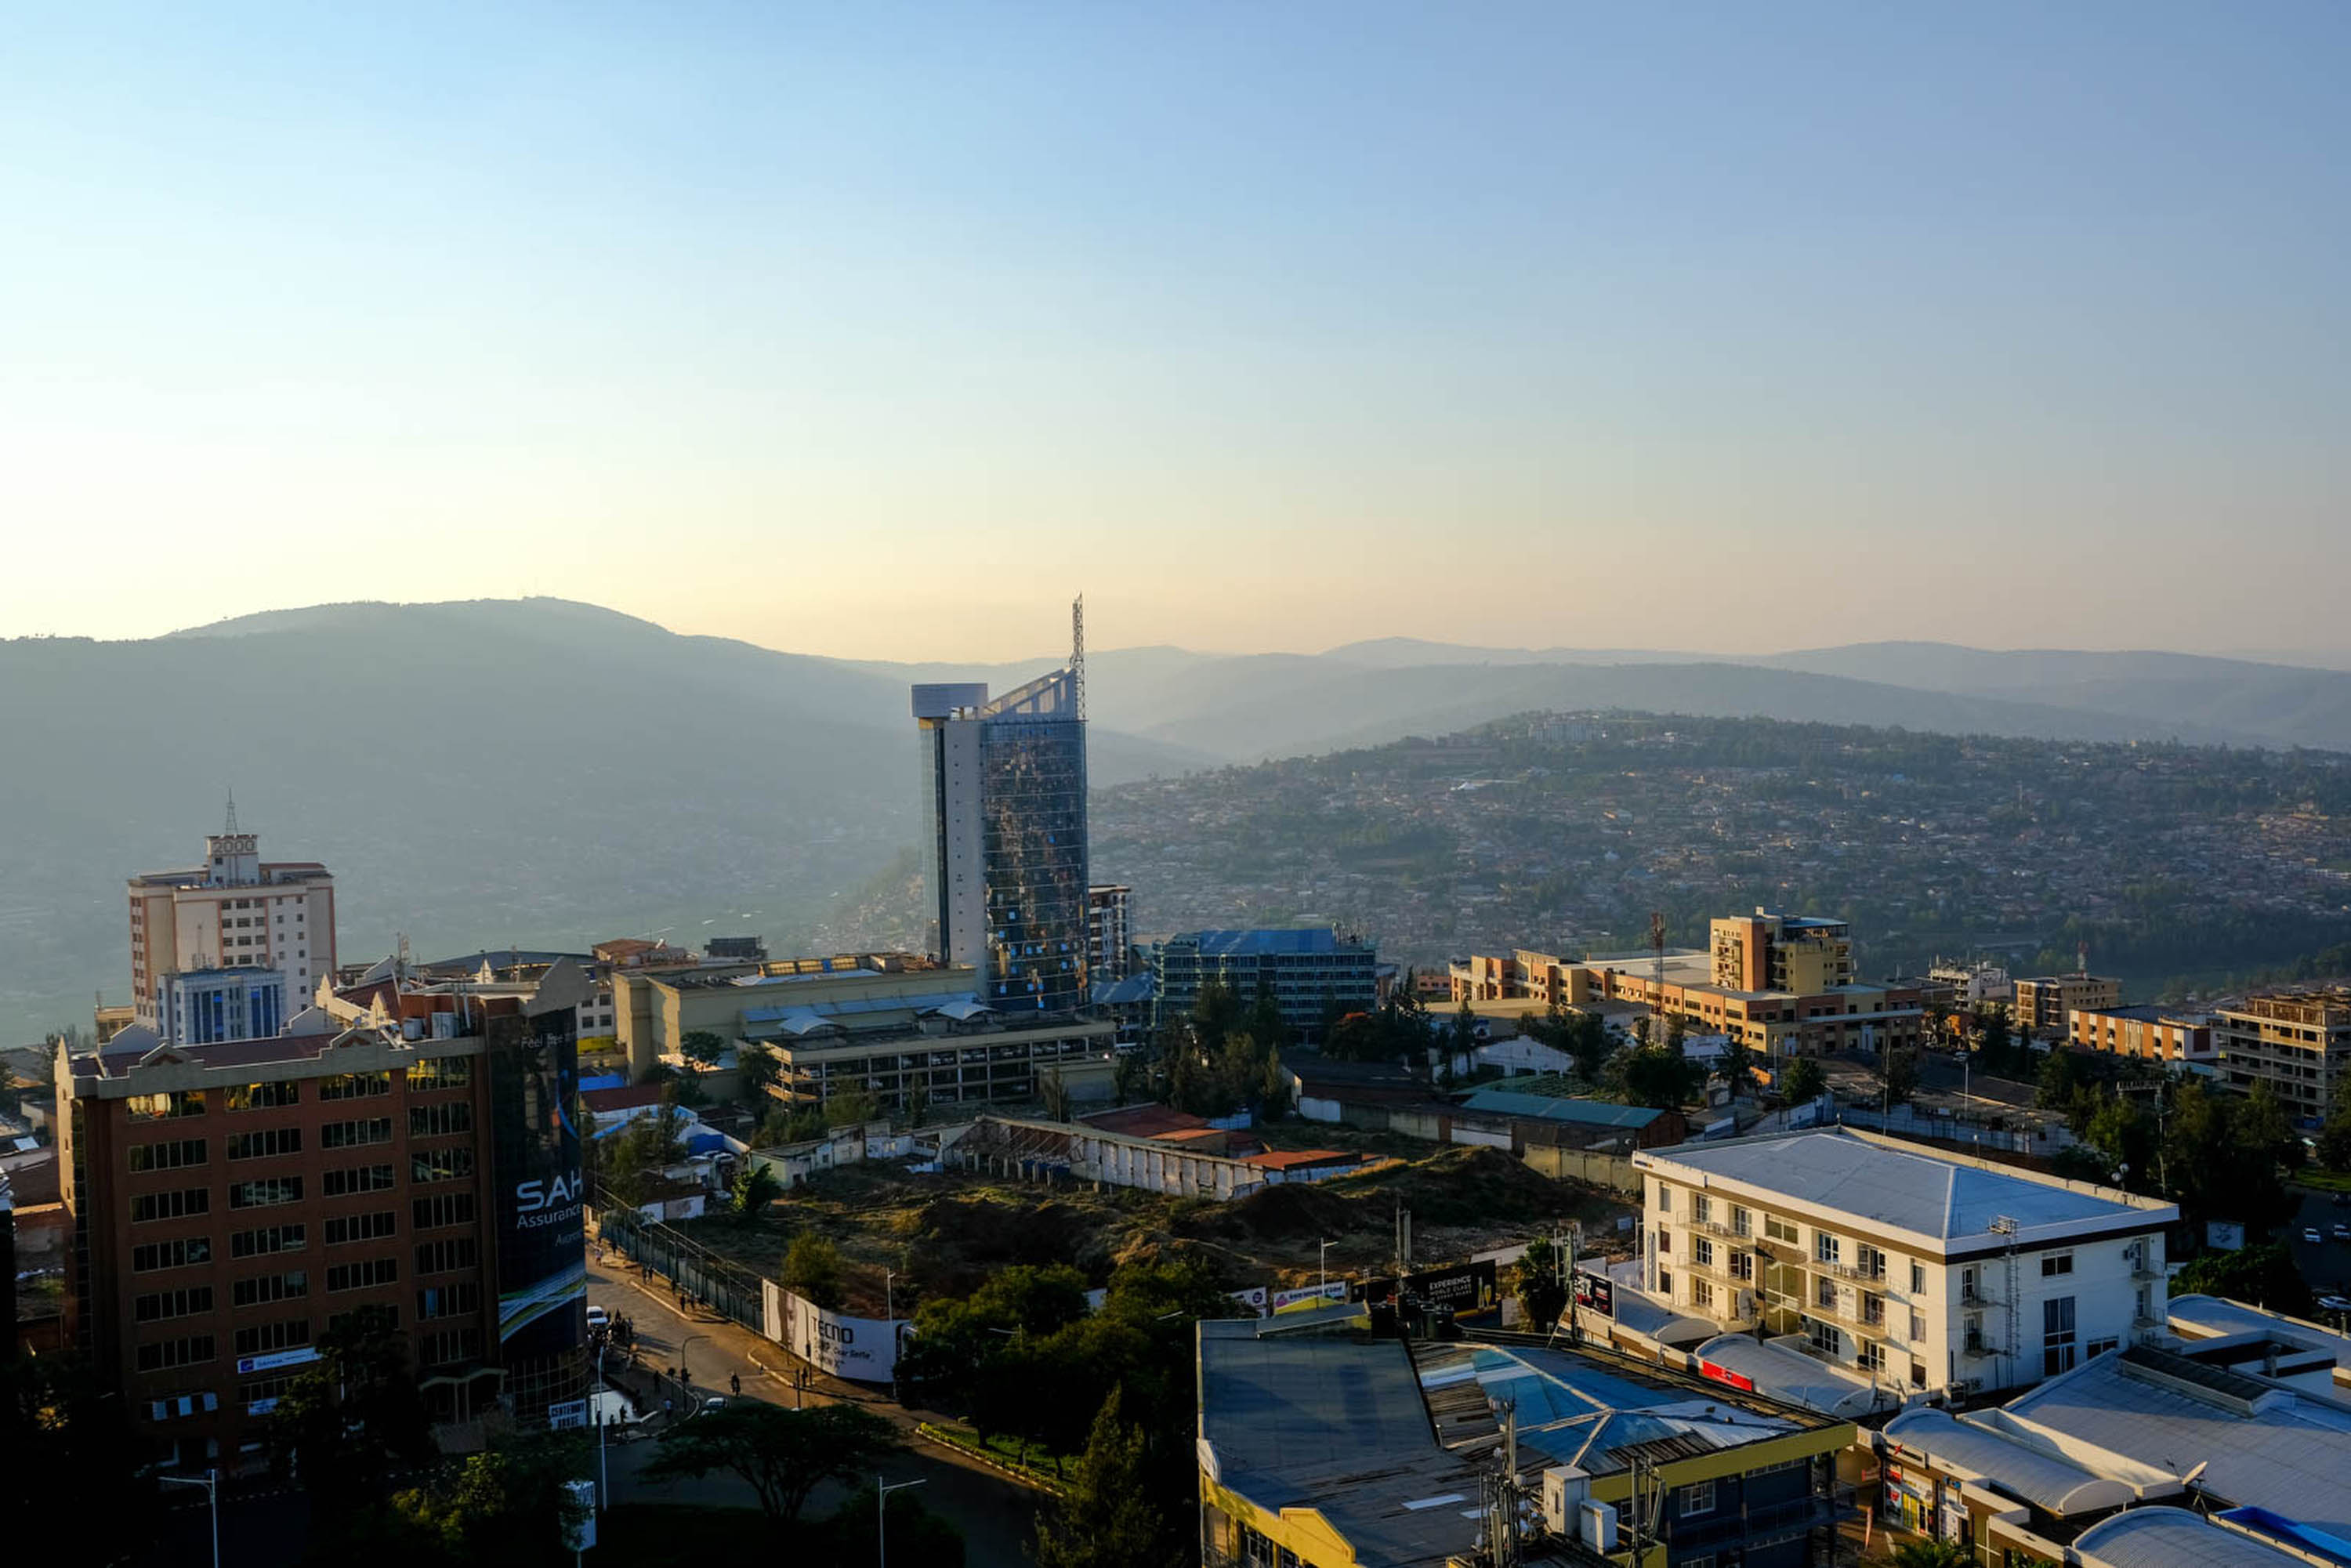 Kigali&#39;s expanding skyline. Rwanda has become more financially prosperous and stable under Kagame&#39;s leadership, but endemic poverty remains an issue nationwide, with around 51% of the population living under the international poverty line.